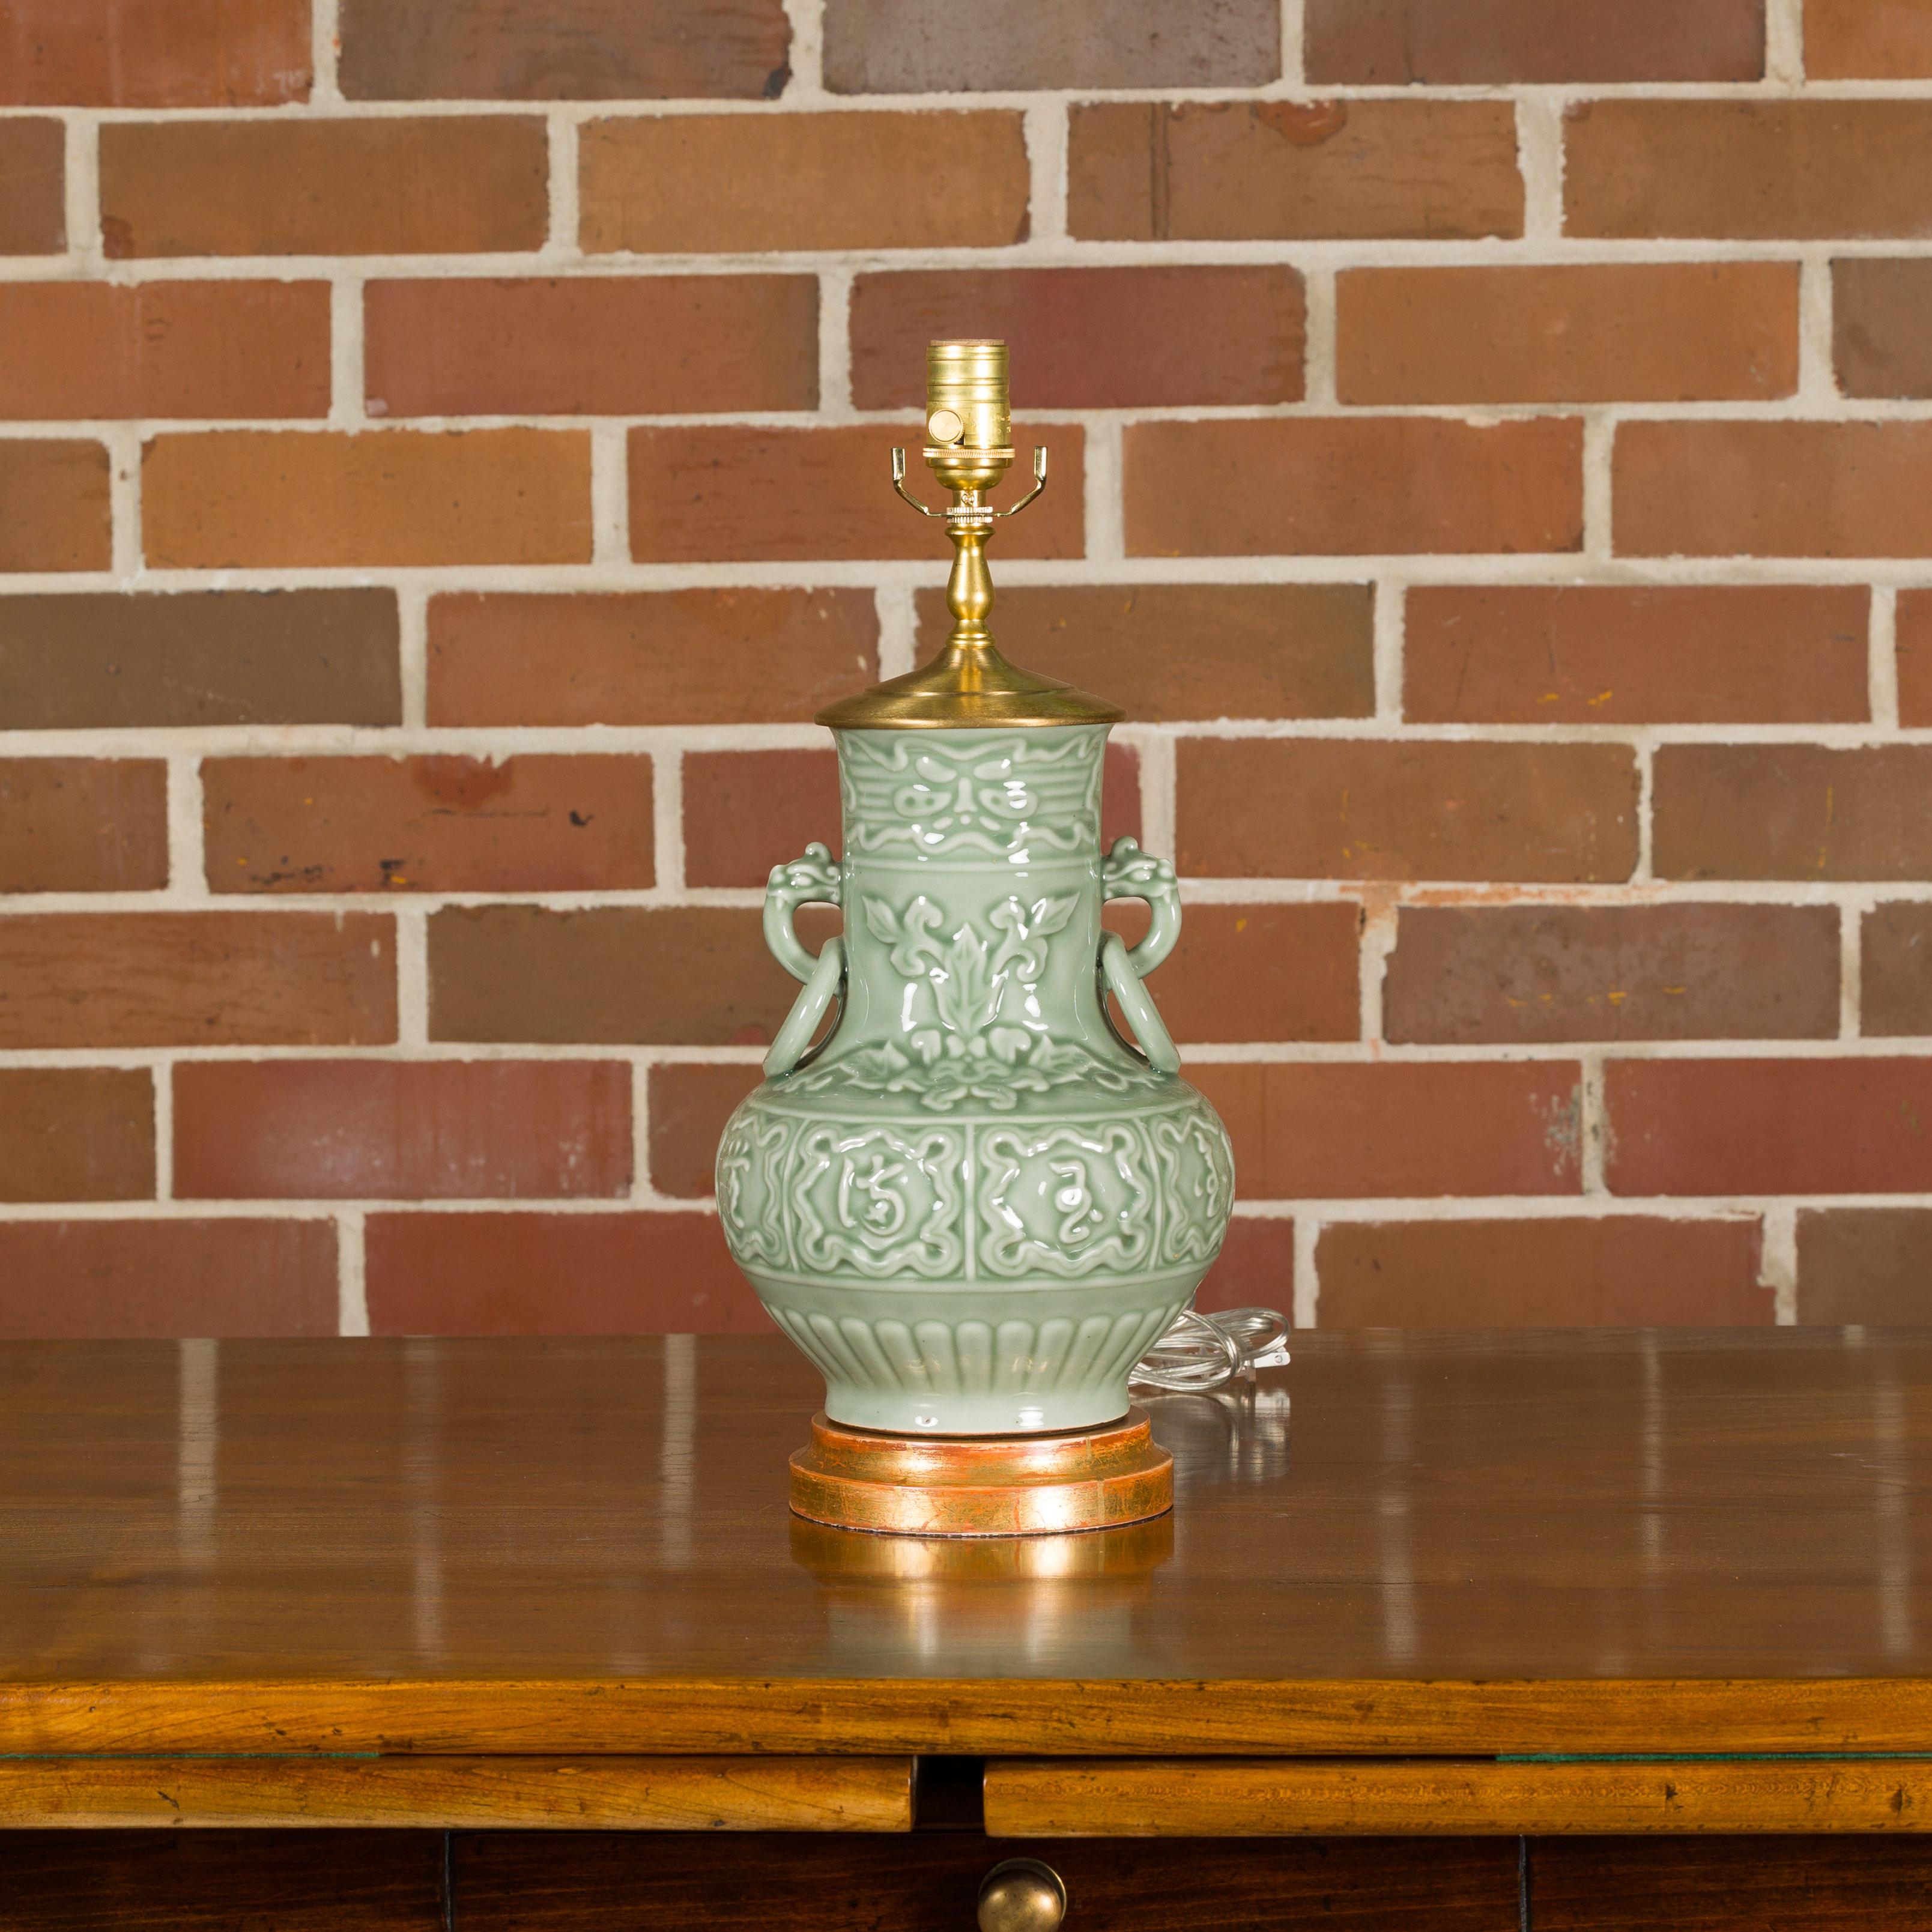 A celadon colored table lamp with raised motifs including foliage and calligraphy, ornate lateral handles and mounted on circular giltwood base. This celadon-colored table lamp is a true testament to the elegance of Asian design. With its exquisite